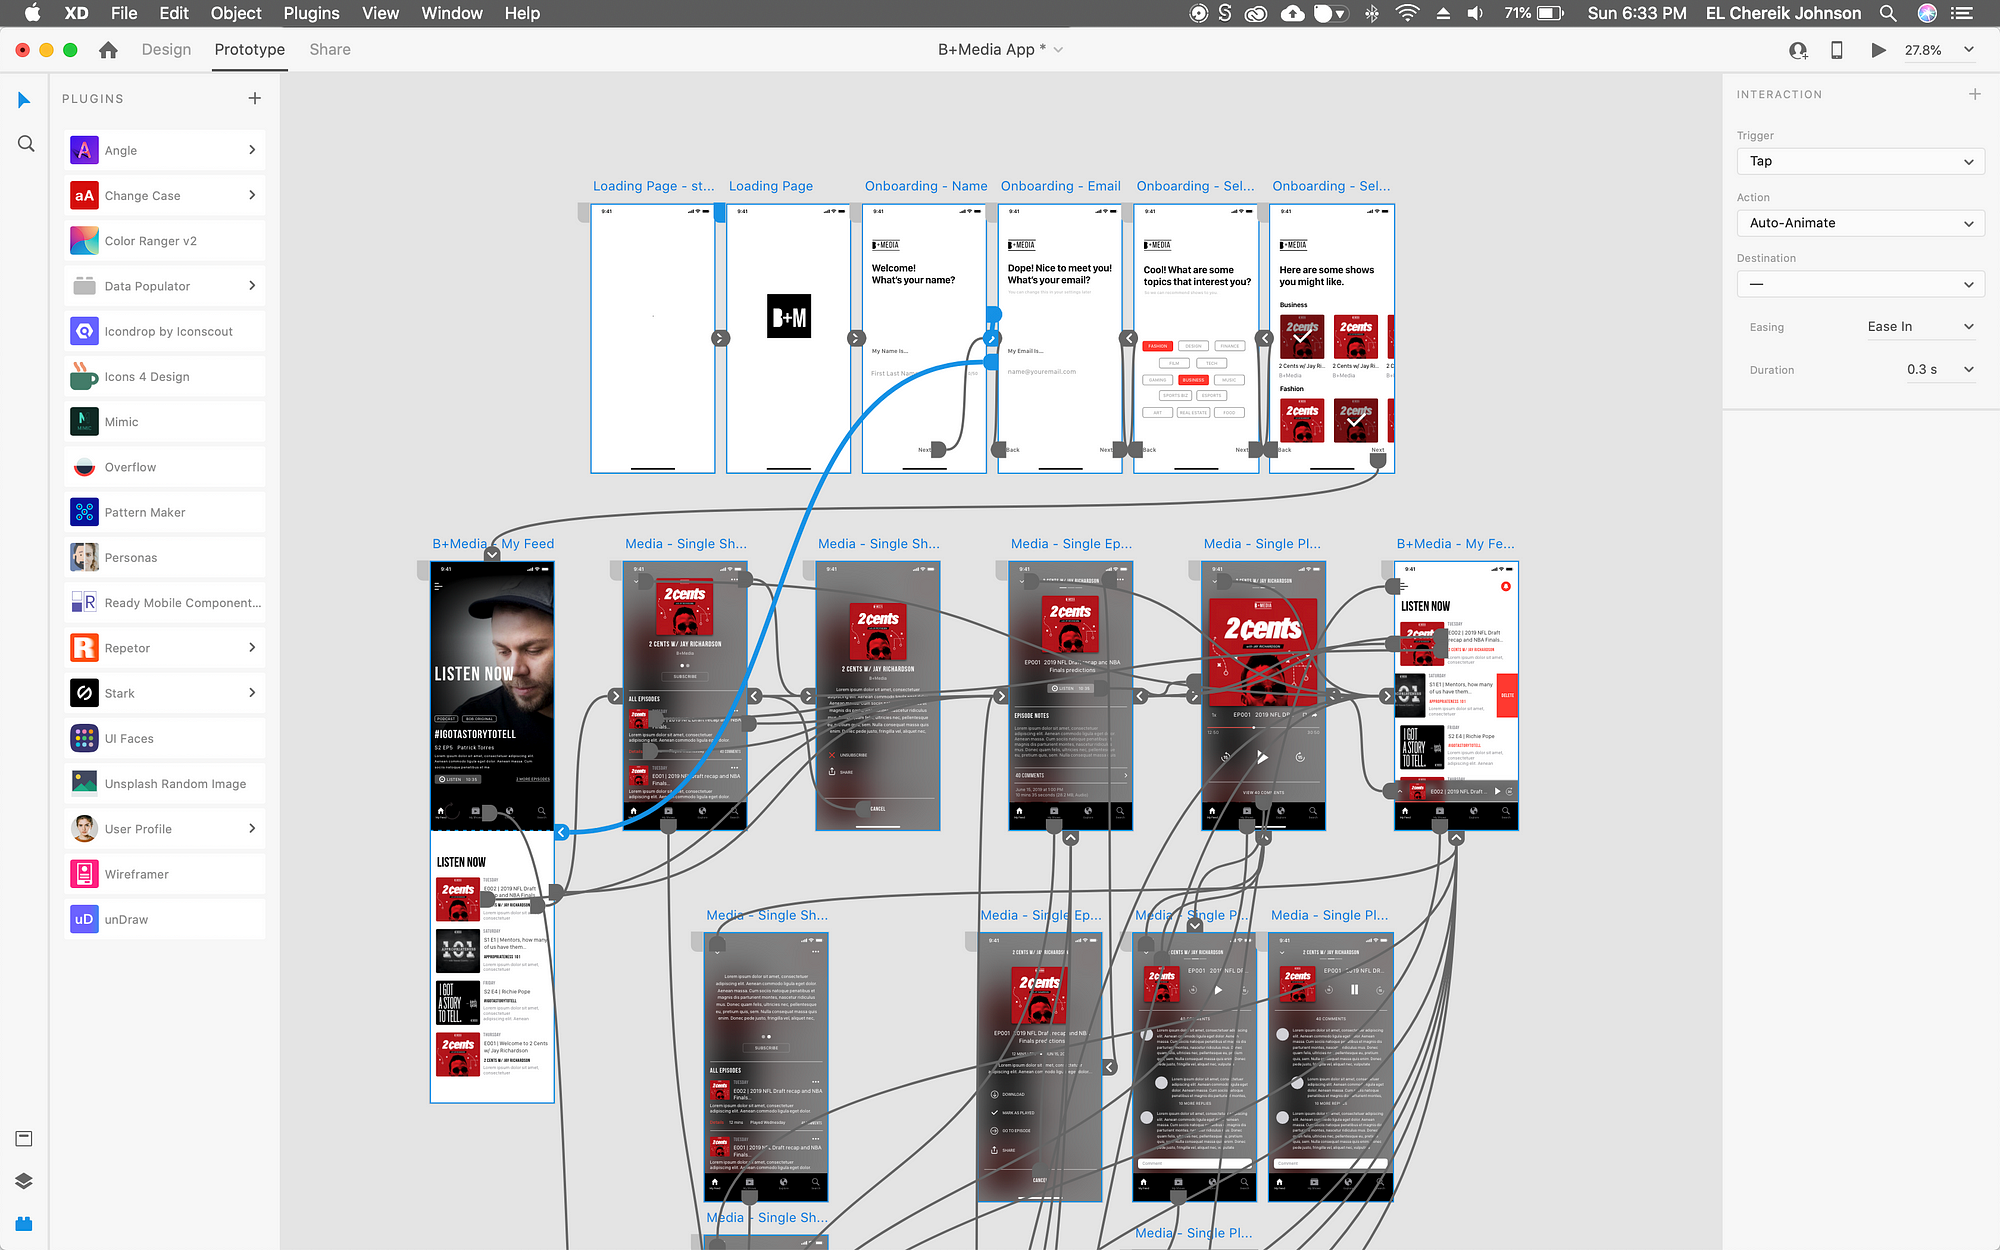 Working With Images in Adobe XD - Clockwork Design Group, Inc